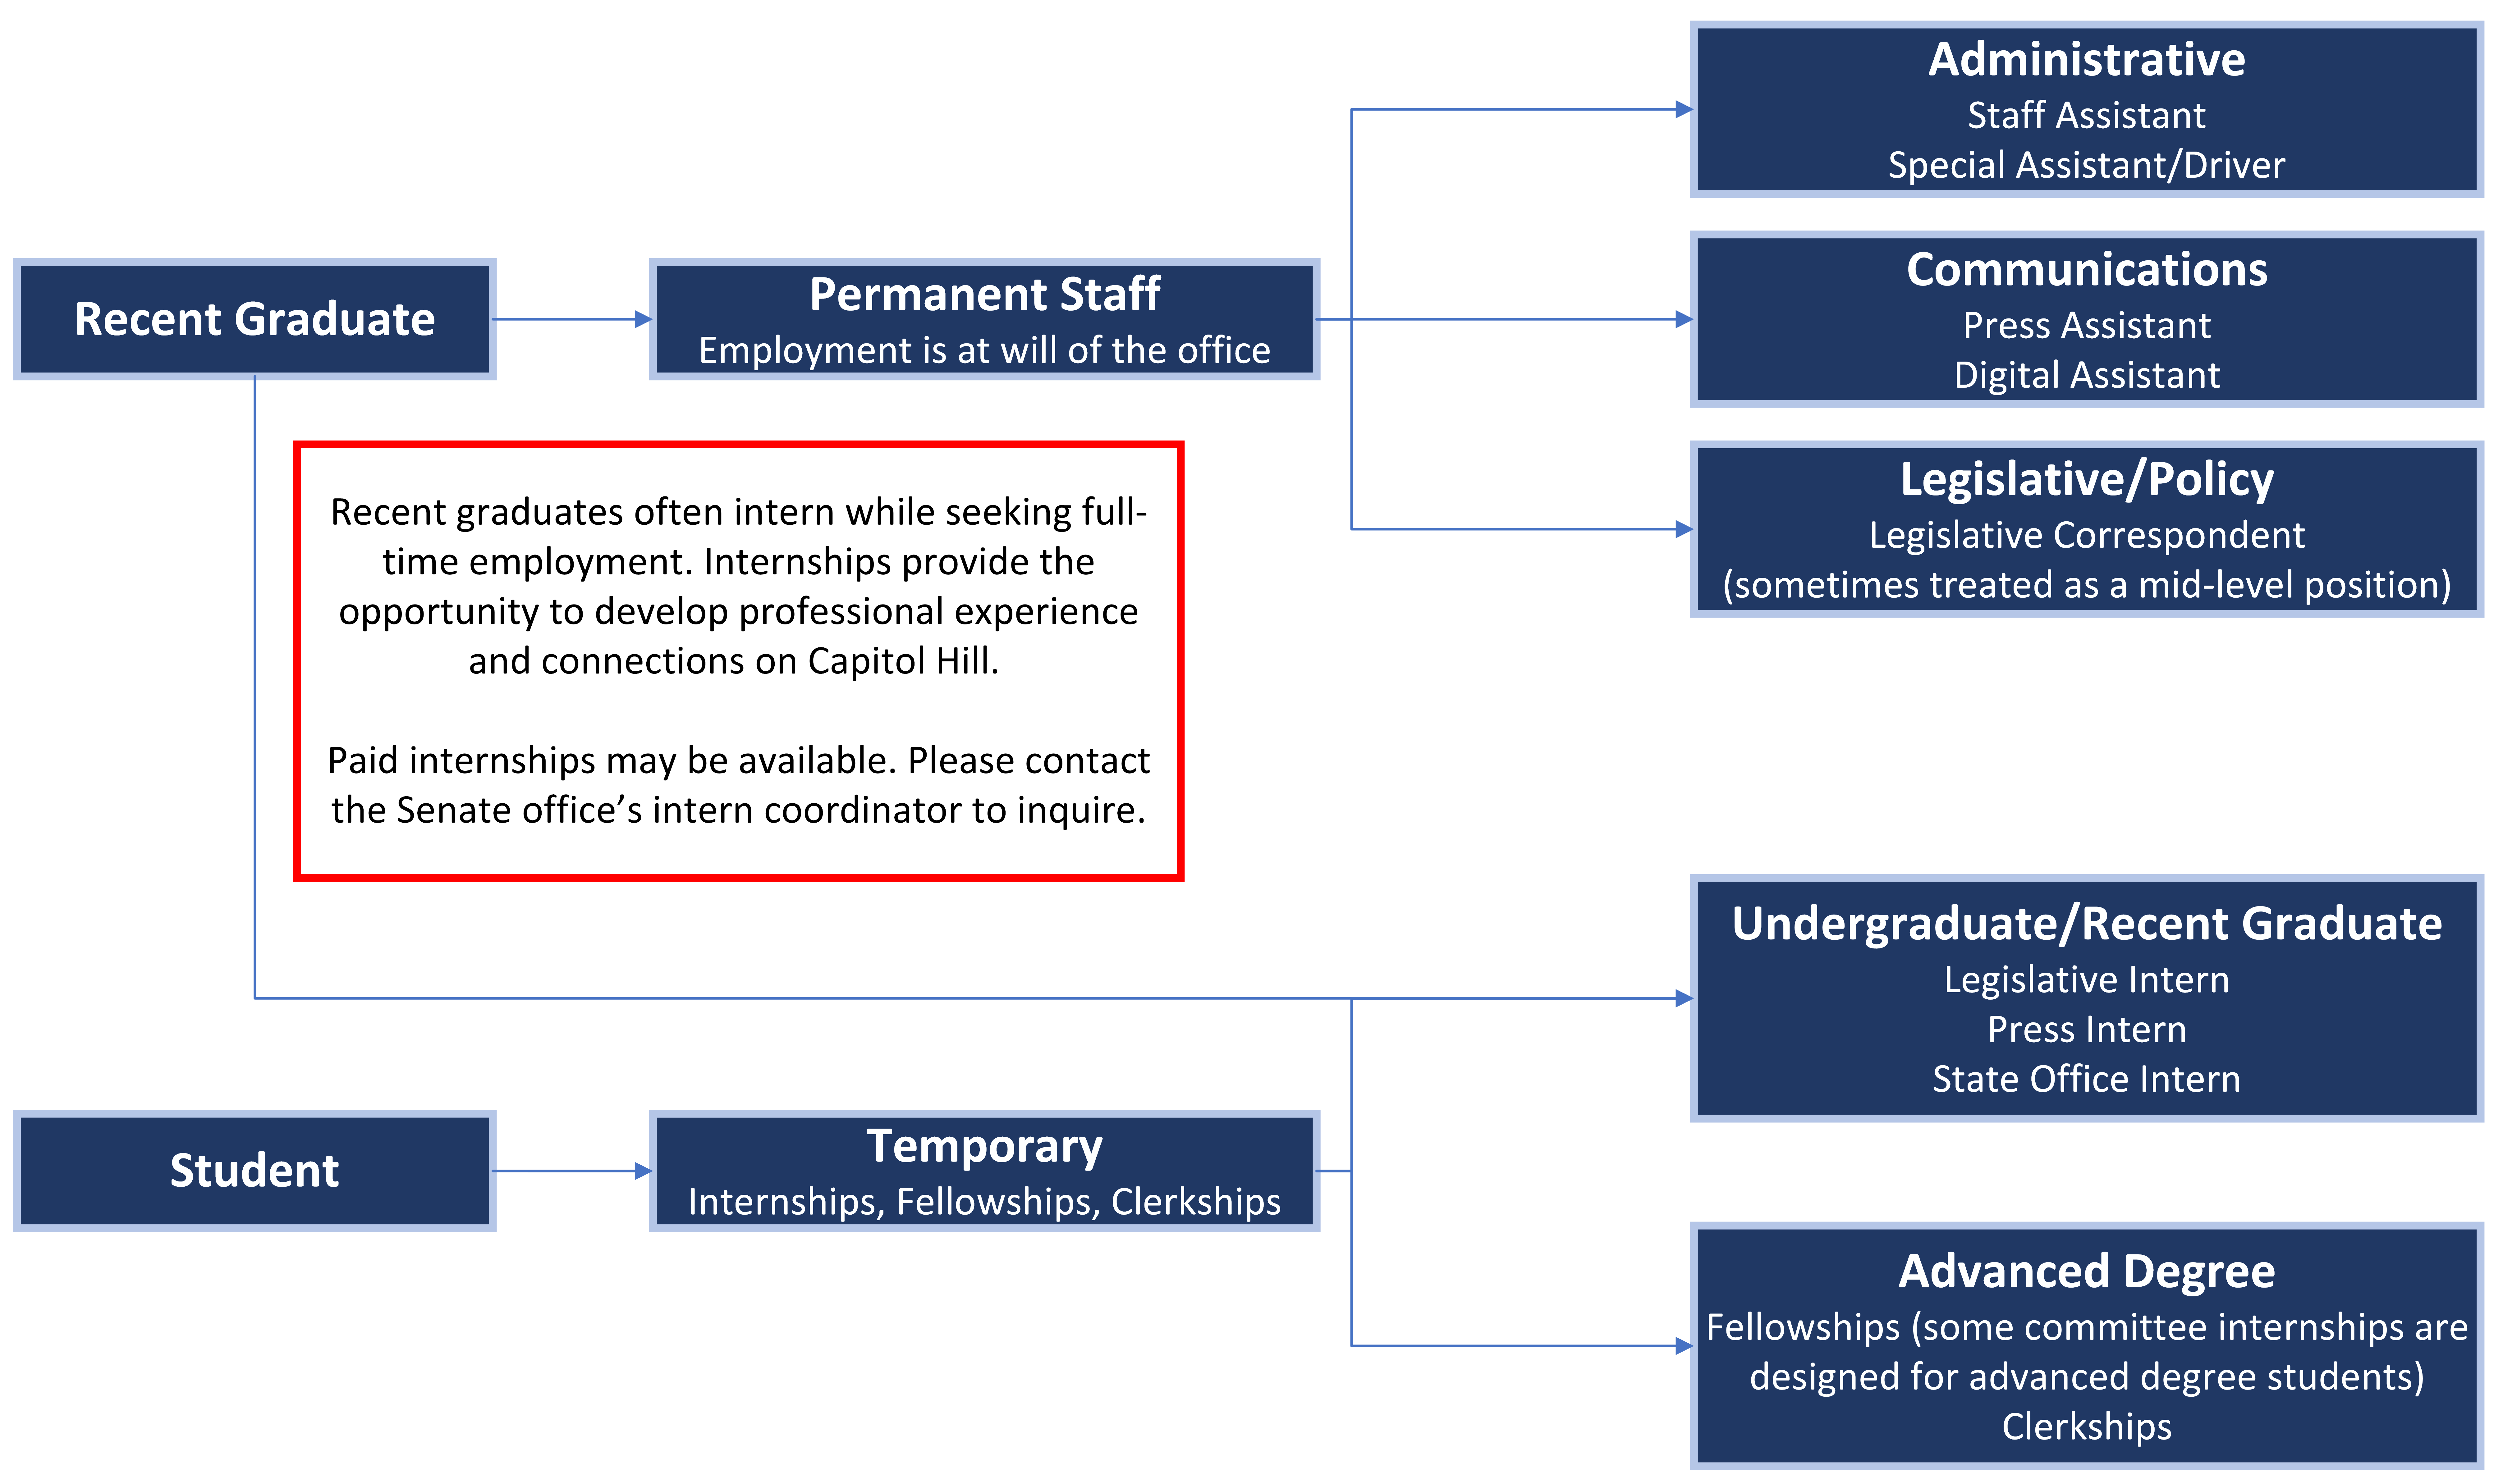 Organization chart showing typical options for early career job seekers.